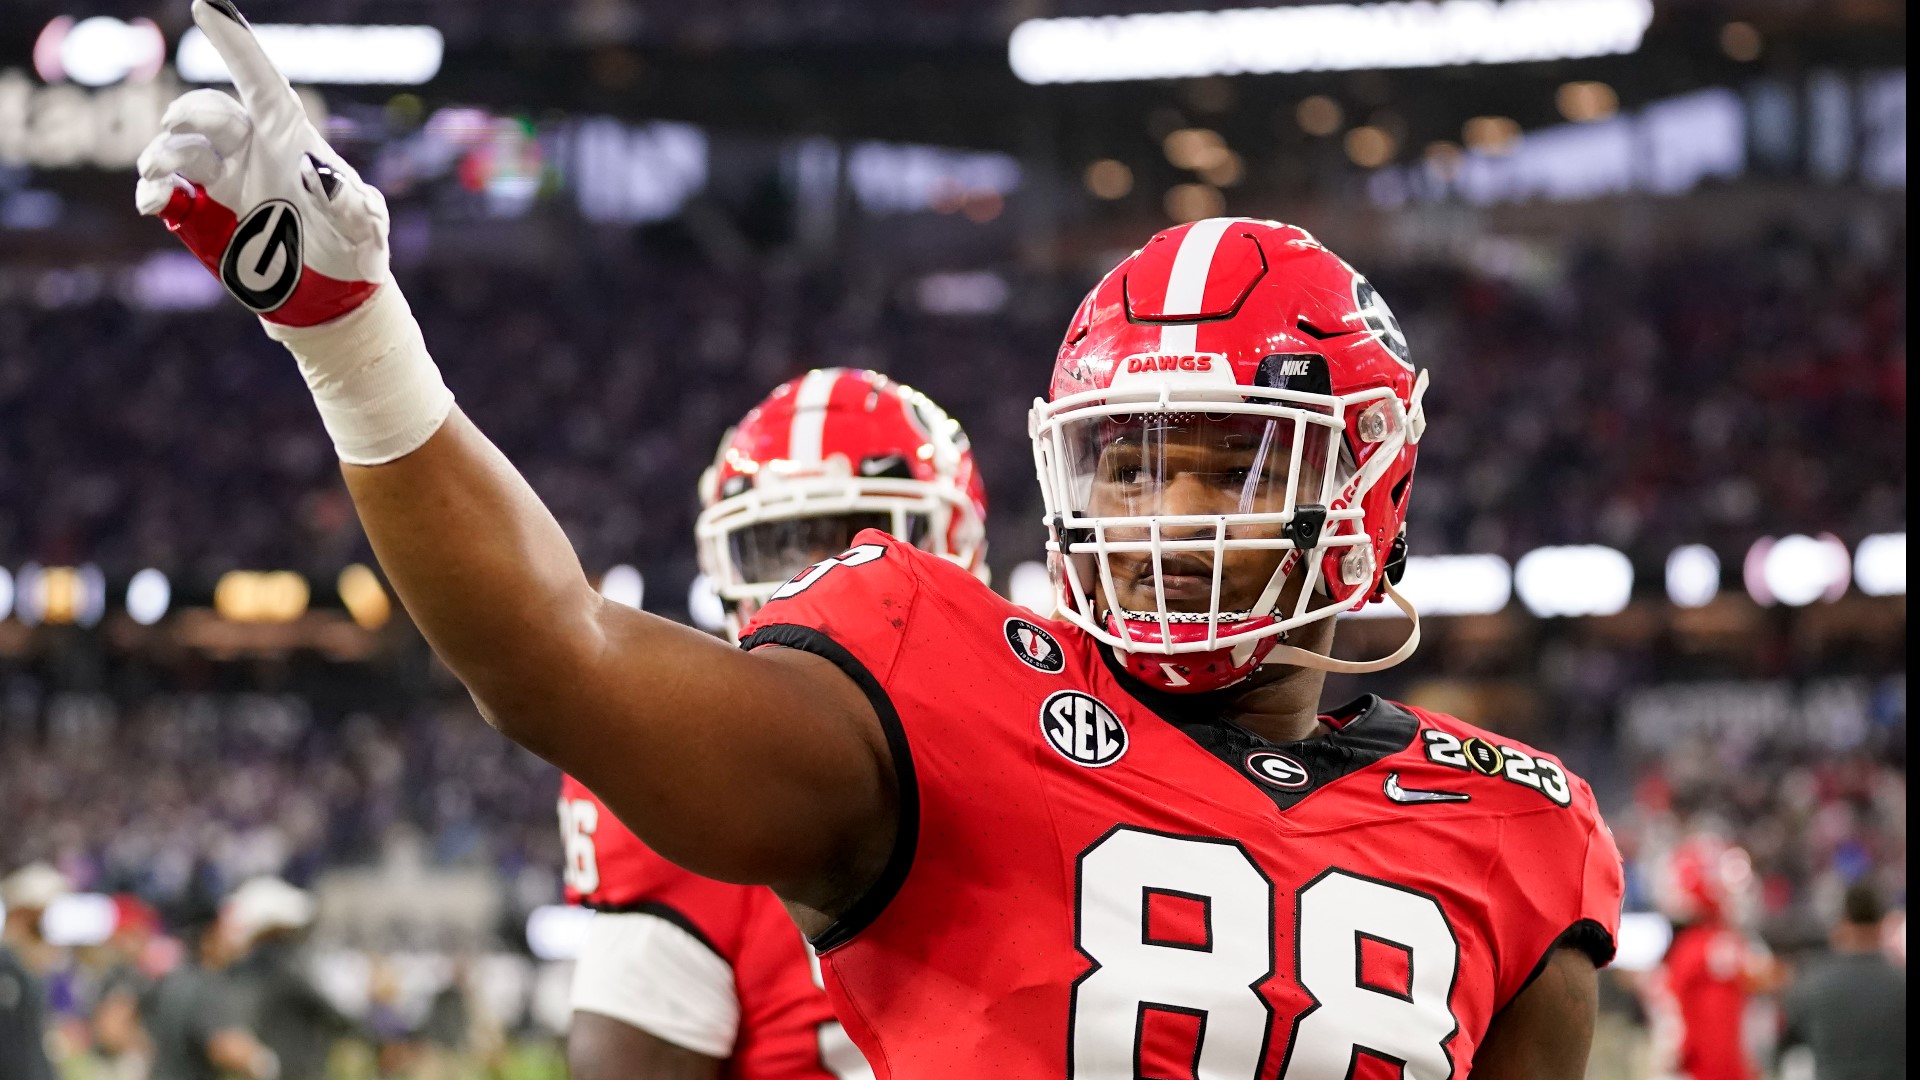 Where have UGA players been taken in NFL Draft